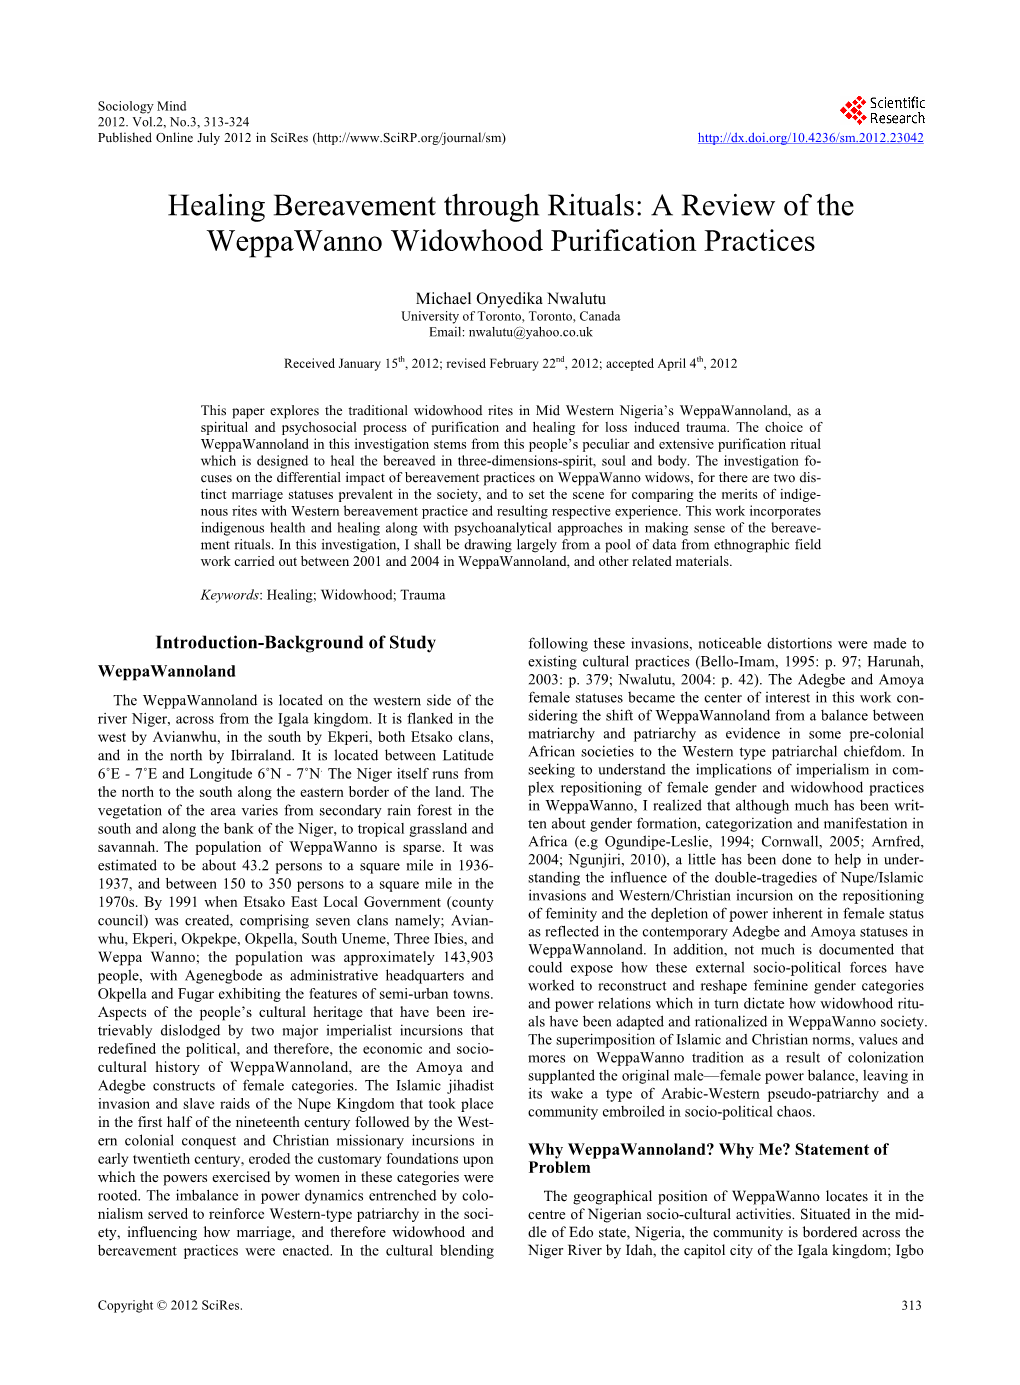 Healing Bereavement Through Rituals: a Review of the Weppawanno Widowhood Purification Practices